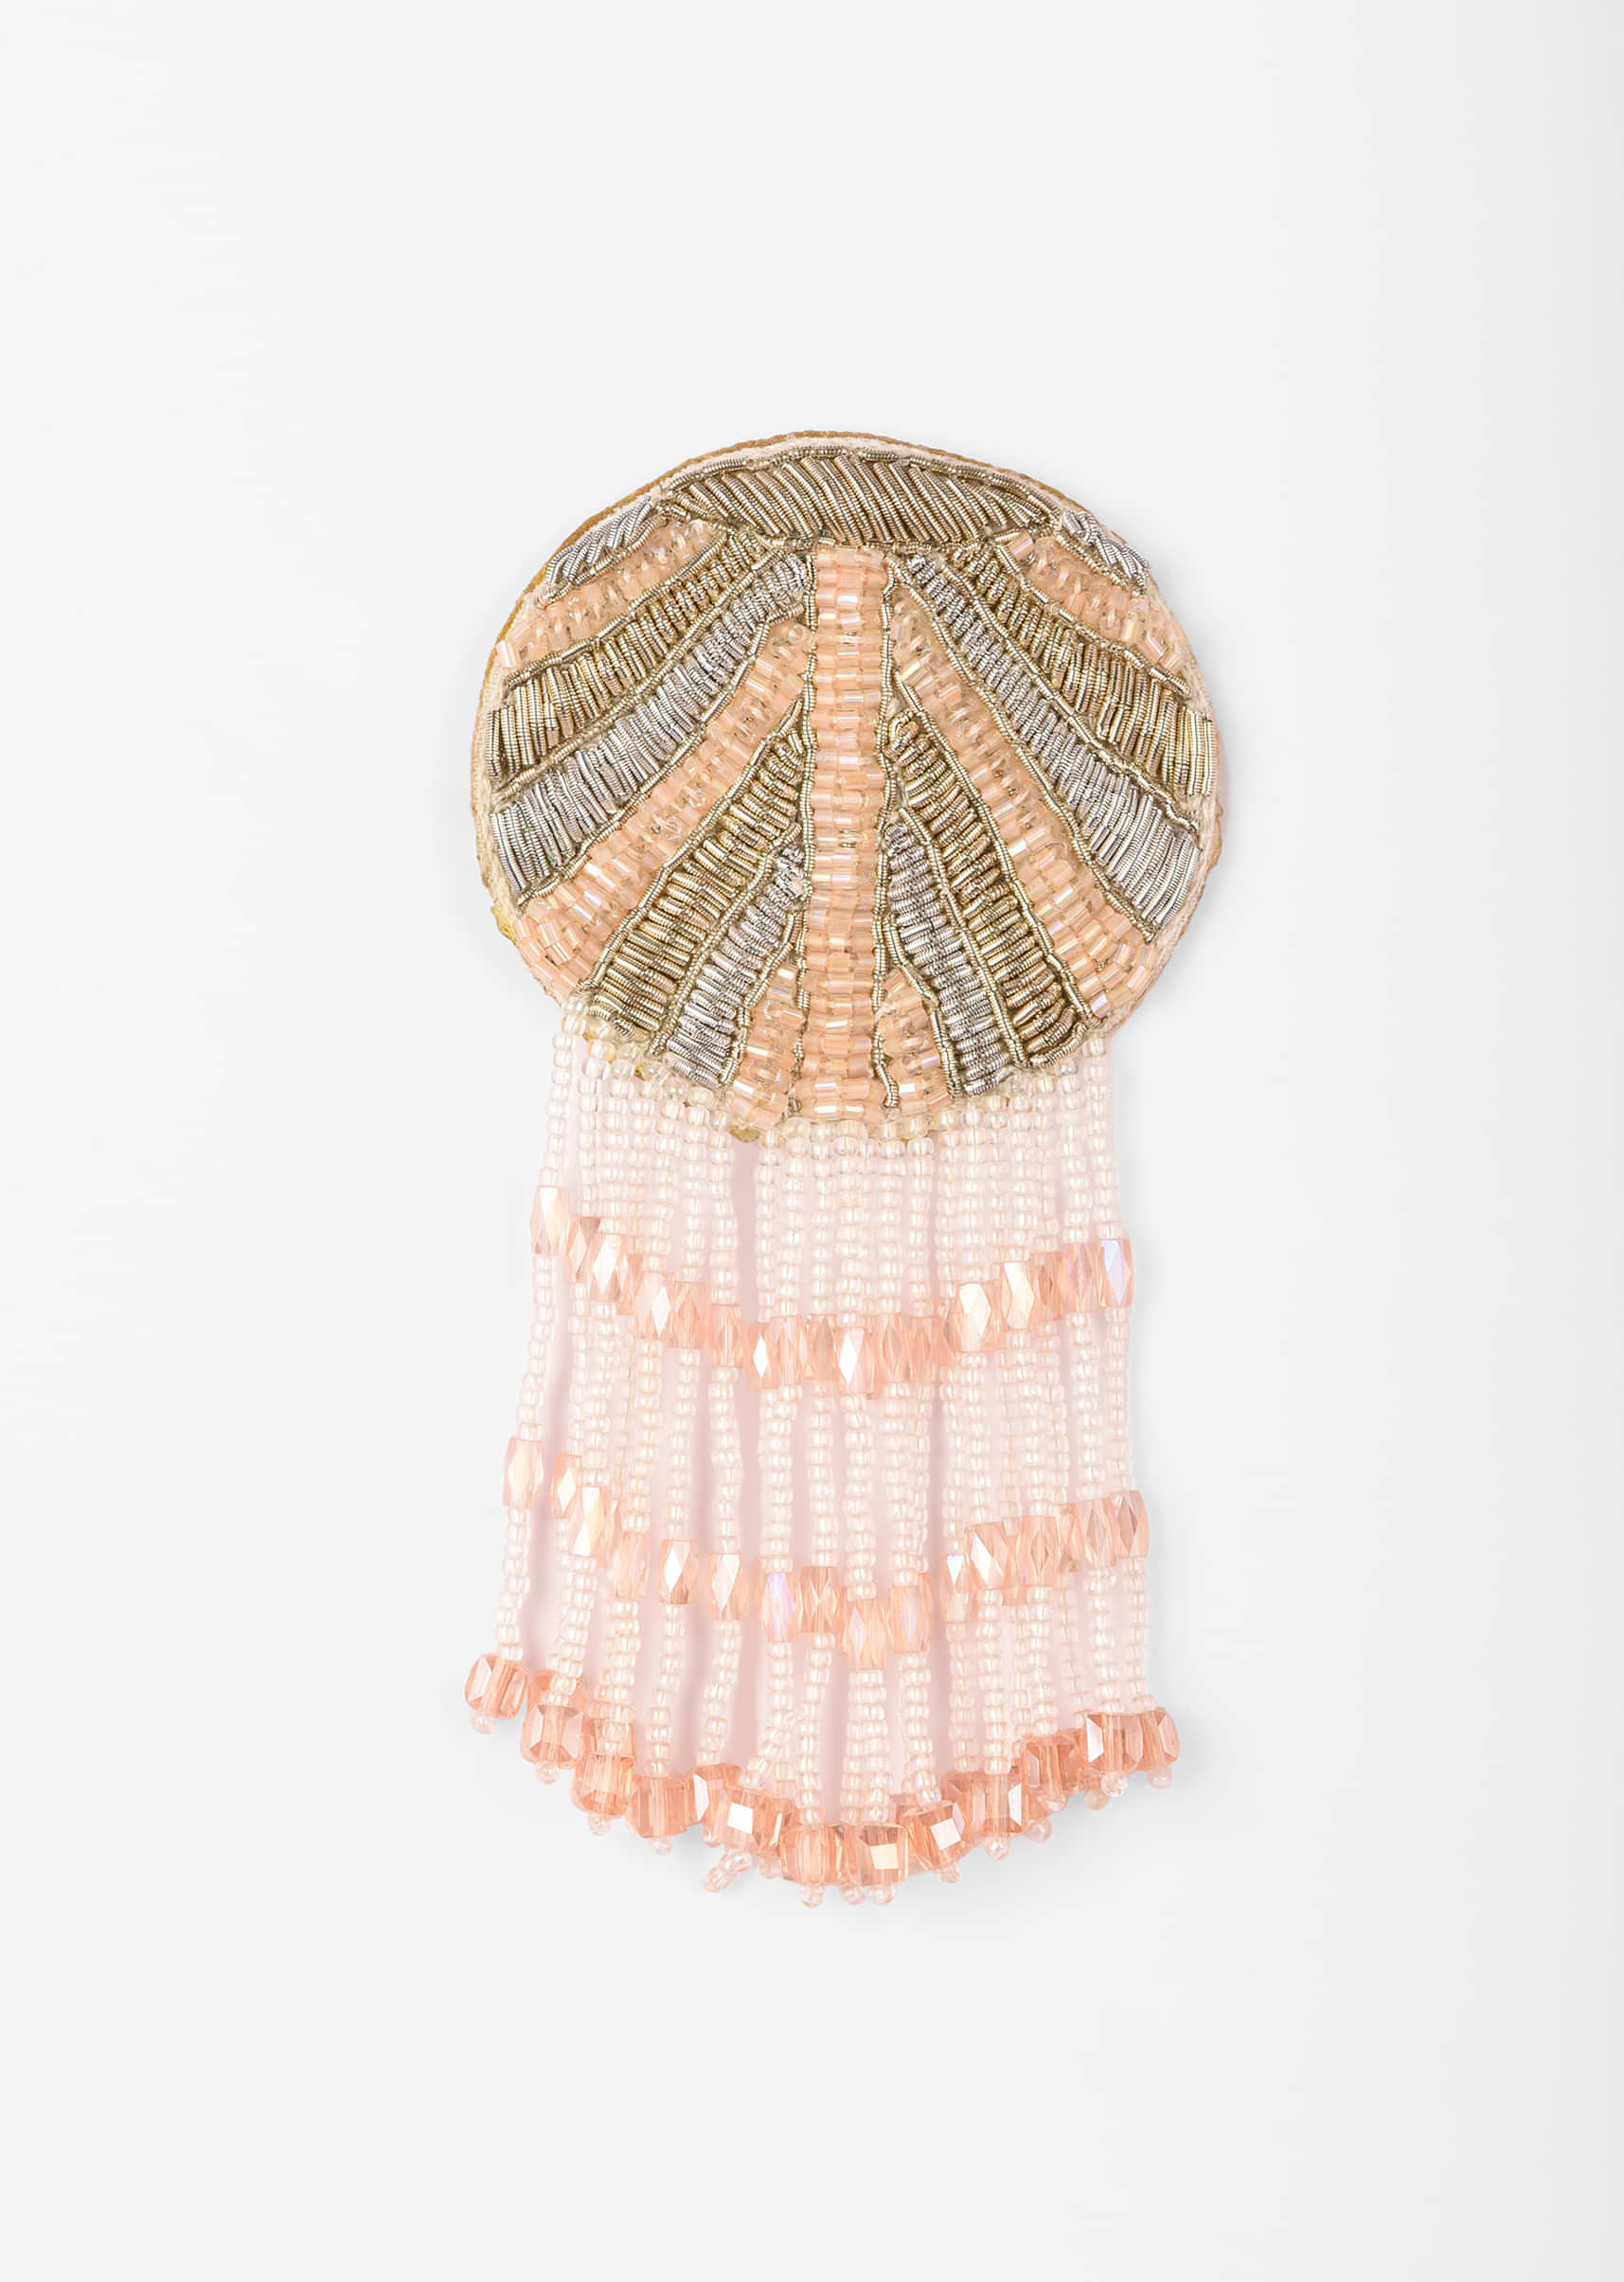 Peach Earrings With Cut Dana And Two Toned Zardosi Work Along With Fringe Detail 